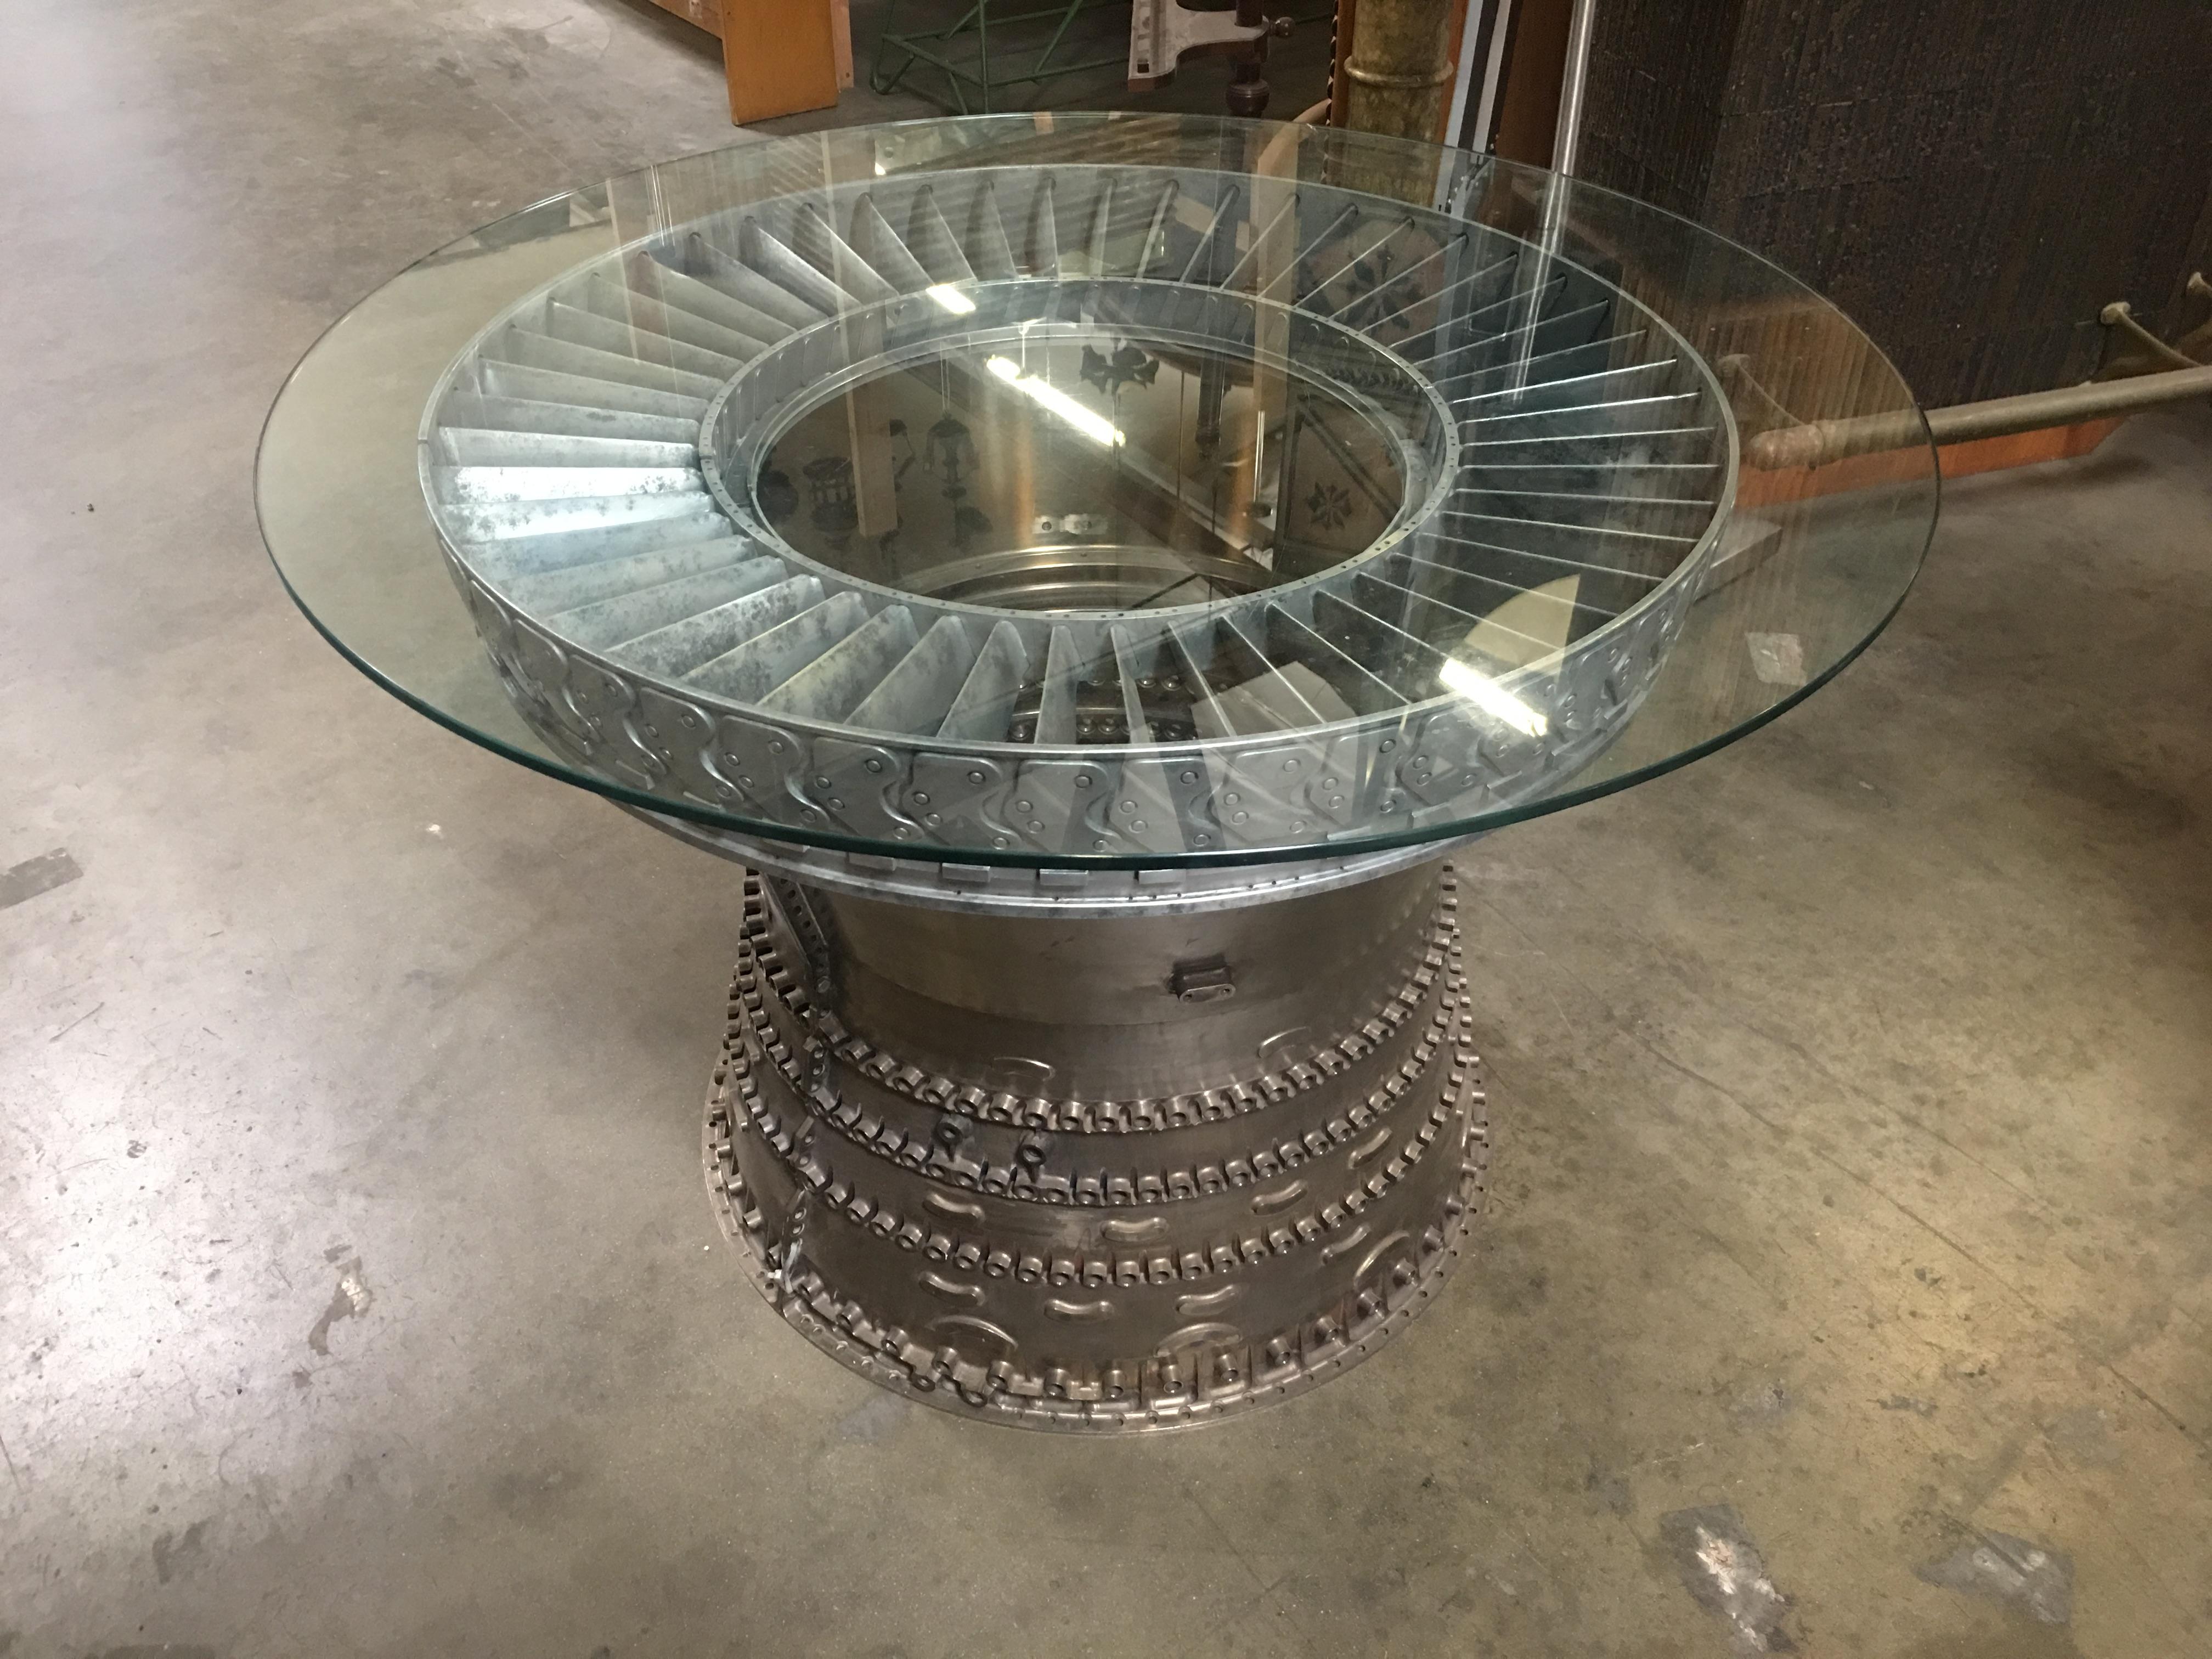 Unique Brutalist style jet turbine dining table featuring the titanium Venturi casing from jet engine with a 36